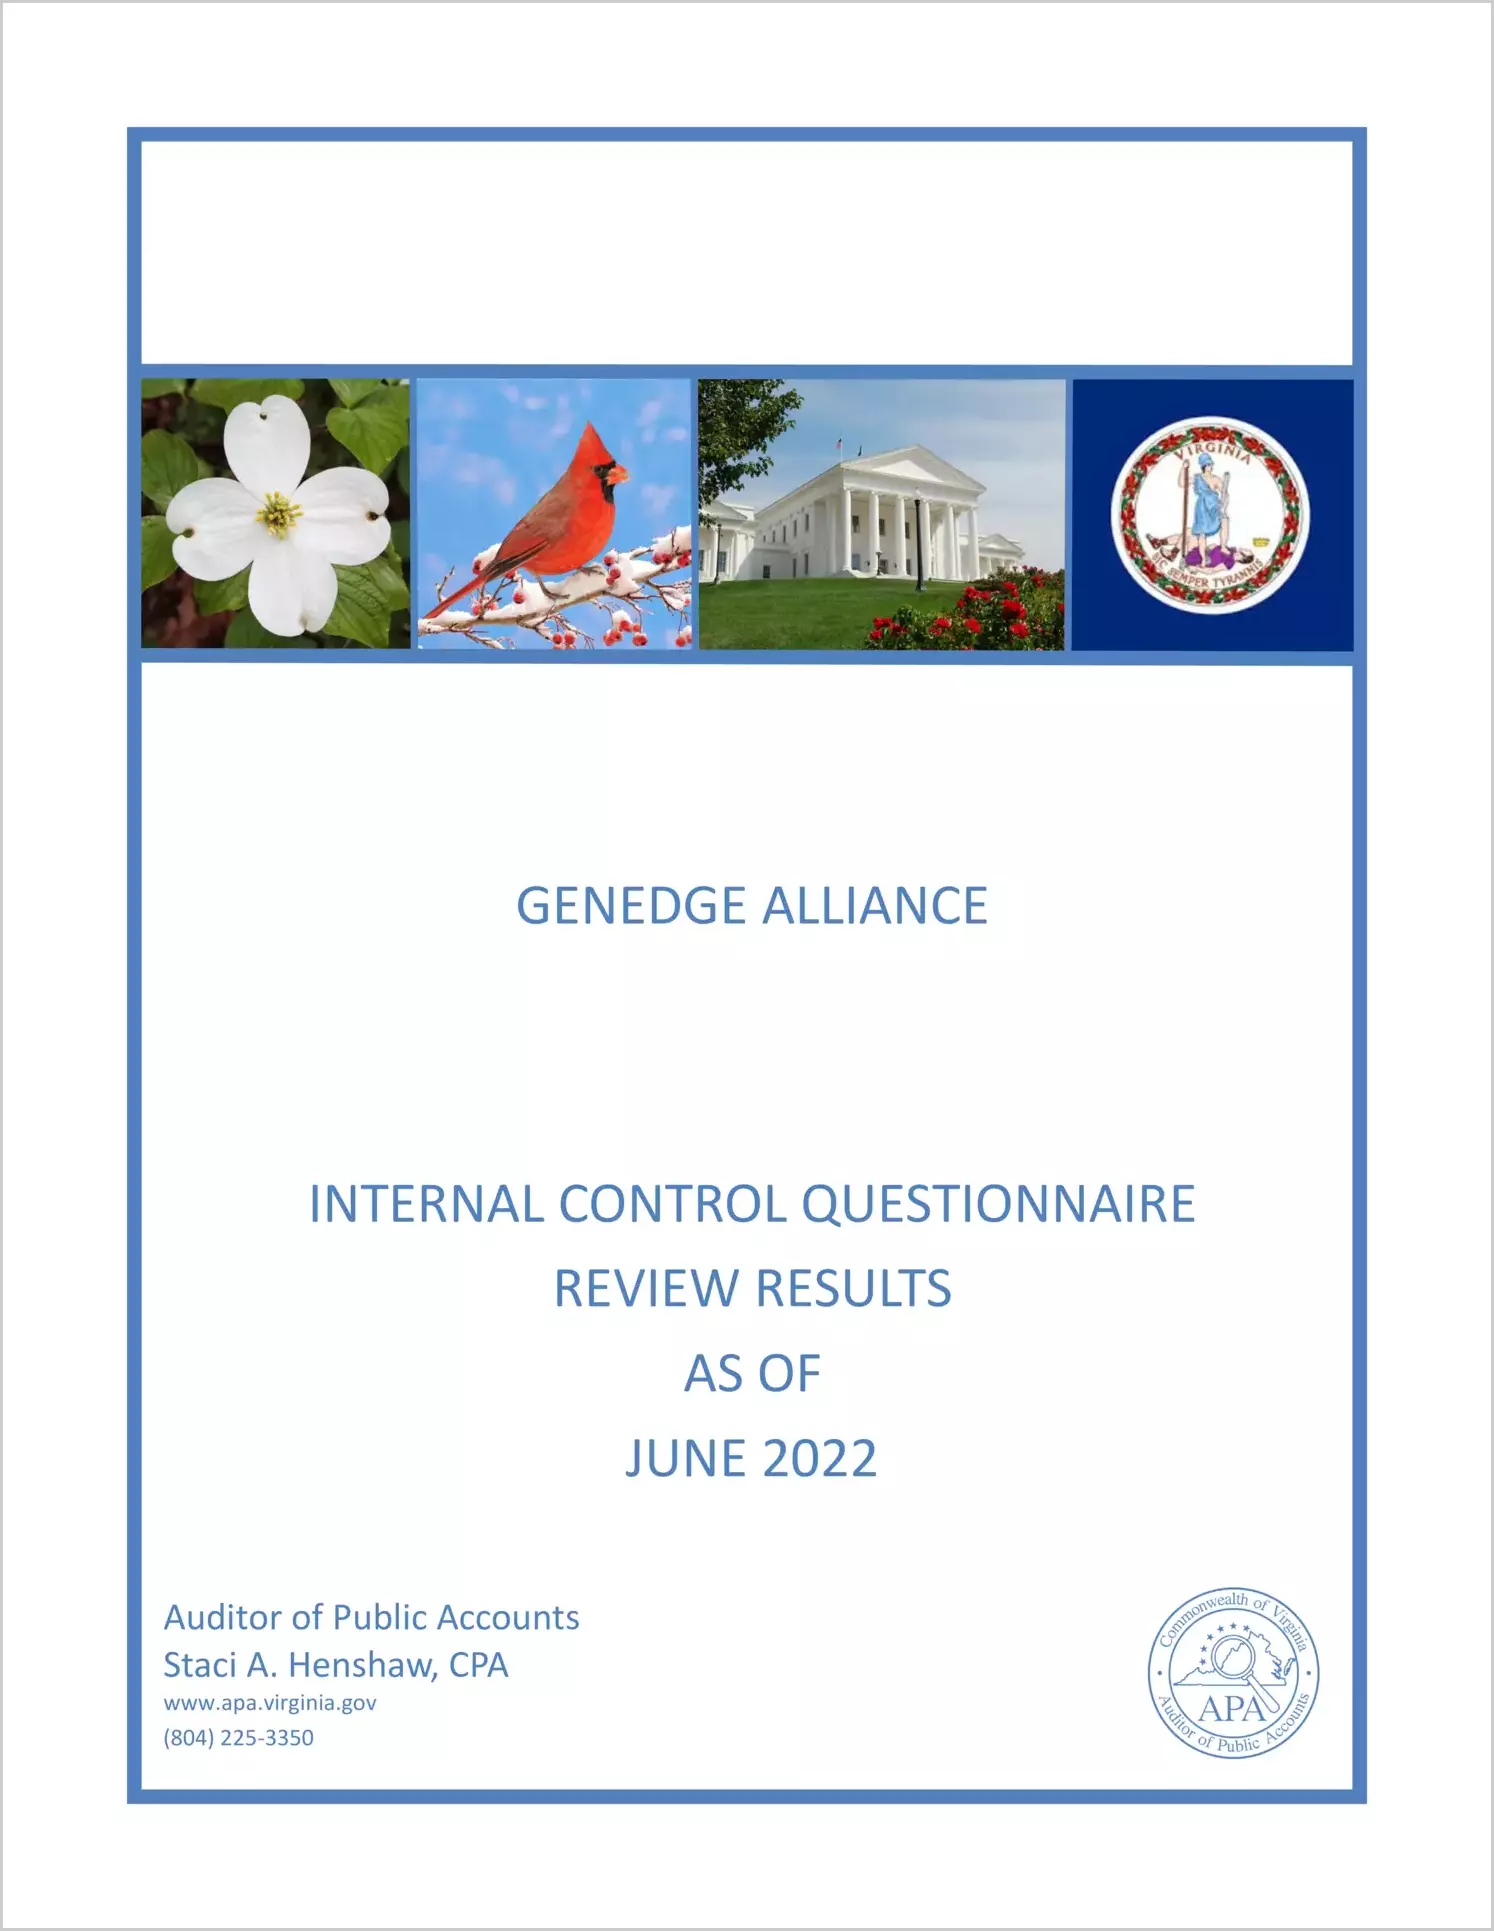 GenEdge Alliance Internal Control Questionnaire Review Results as of June 2022